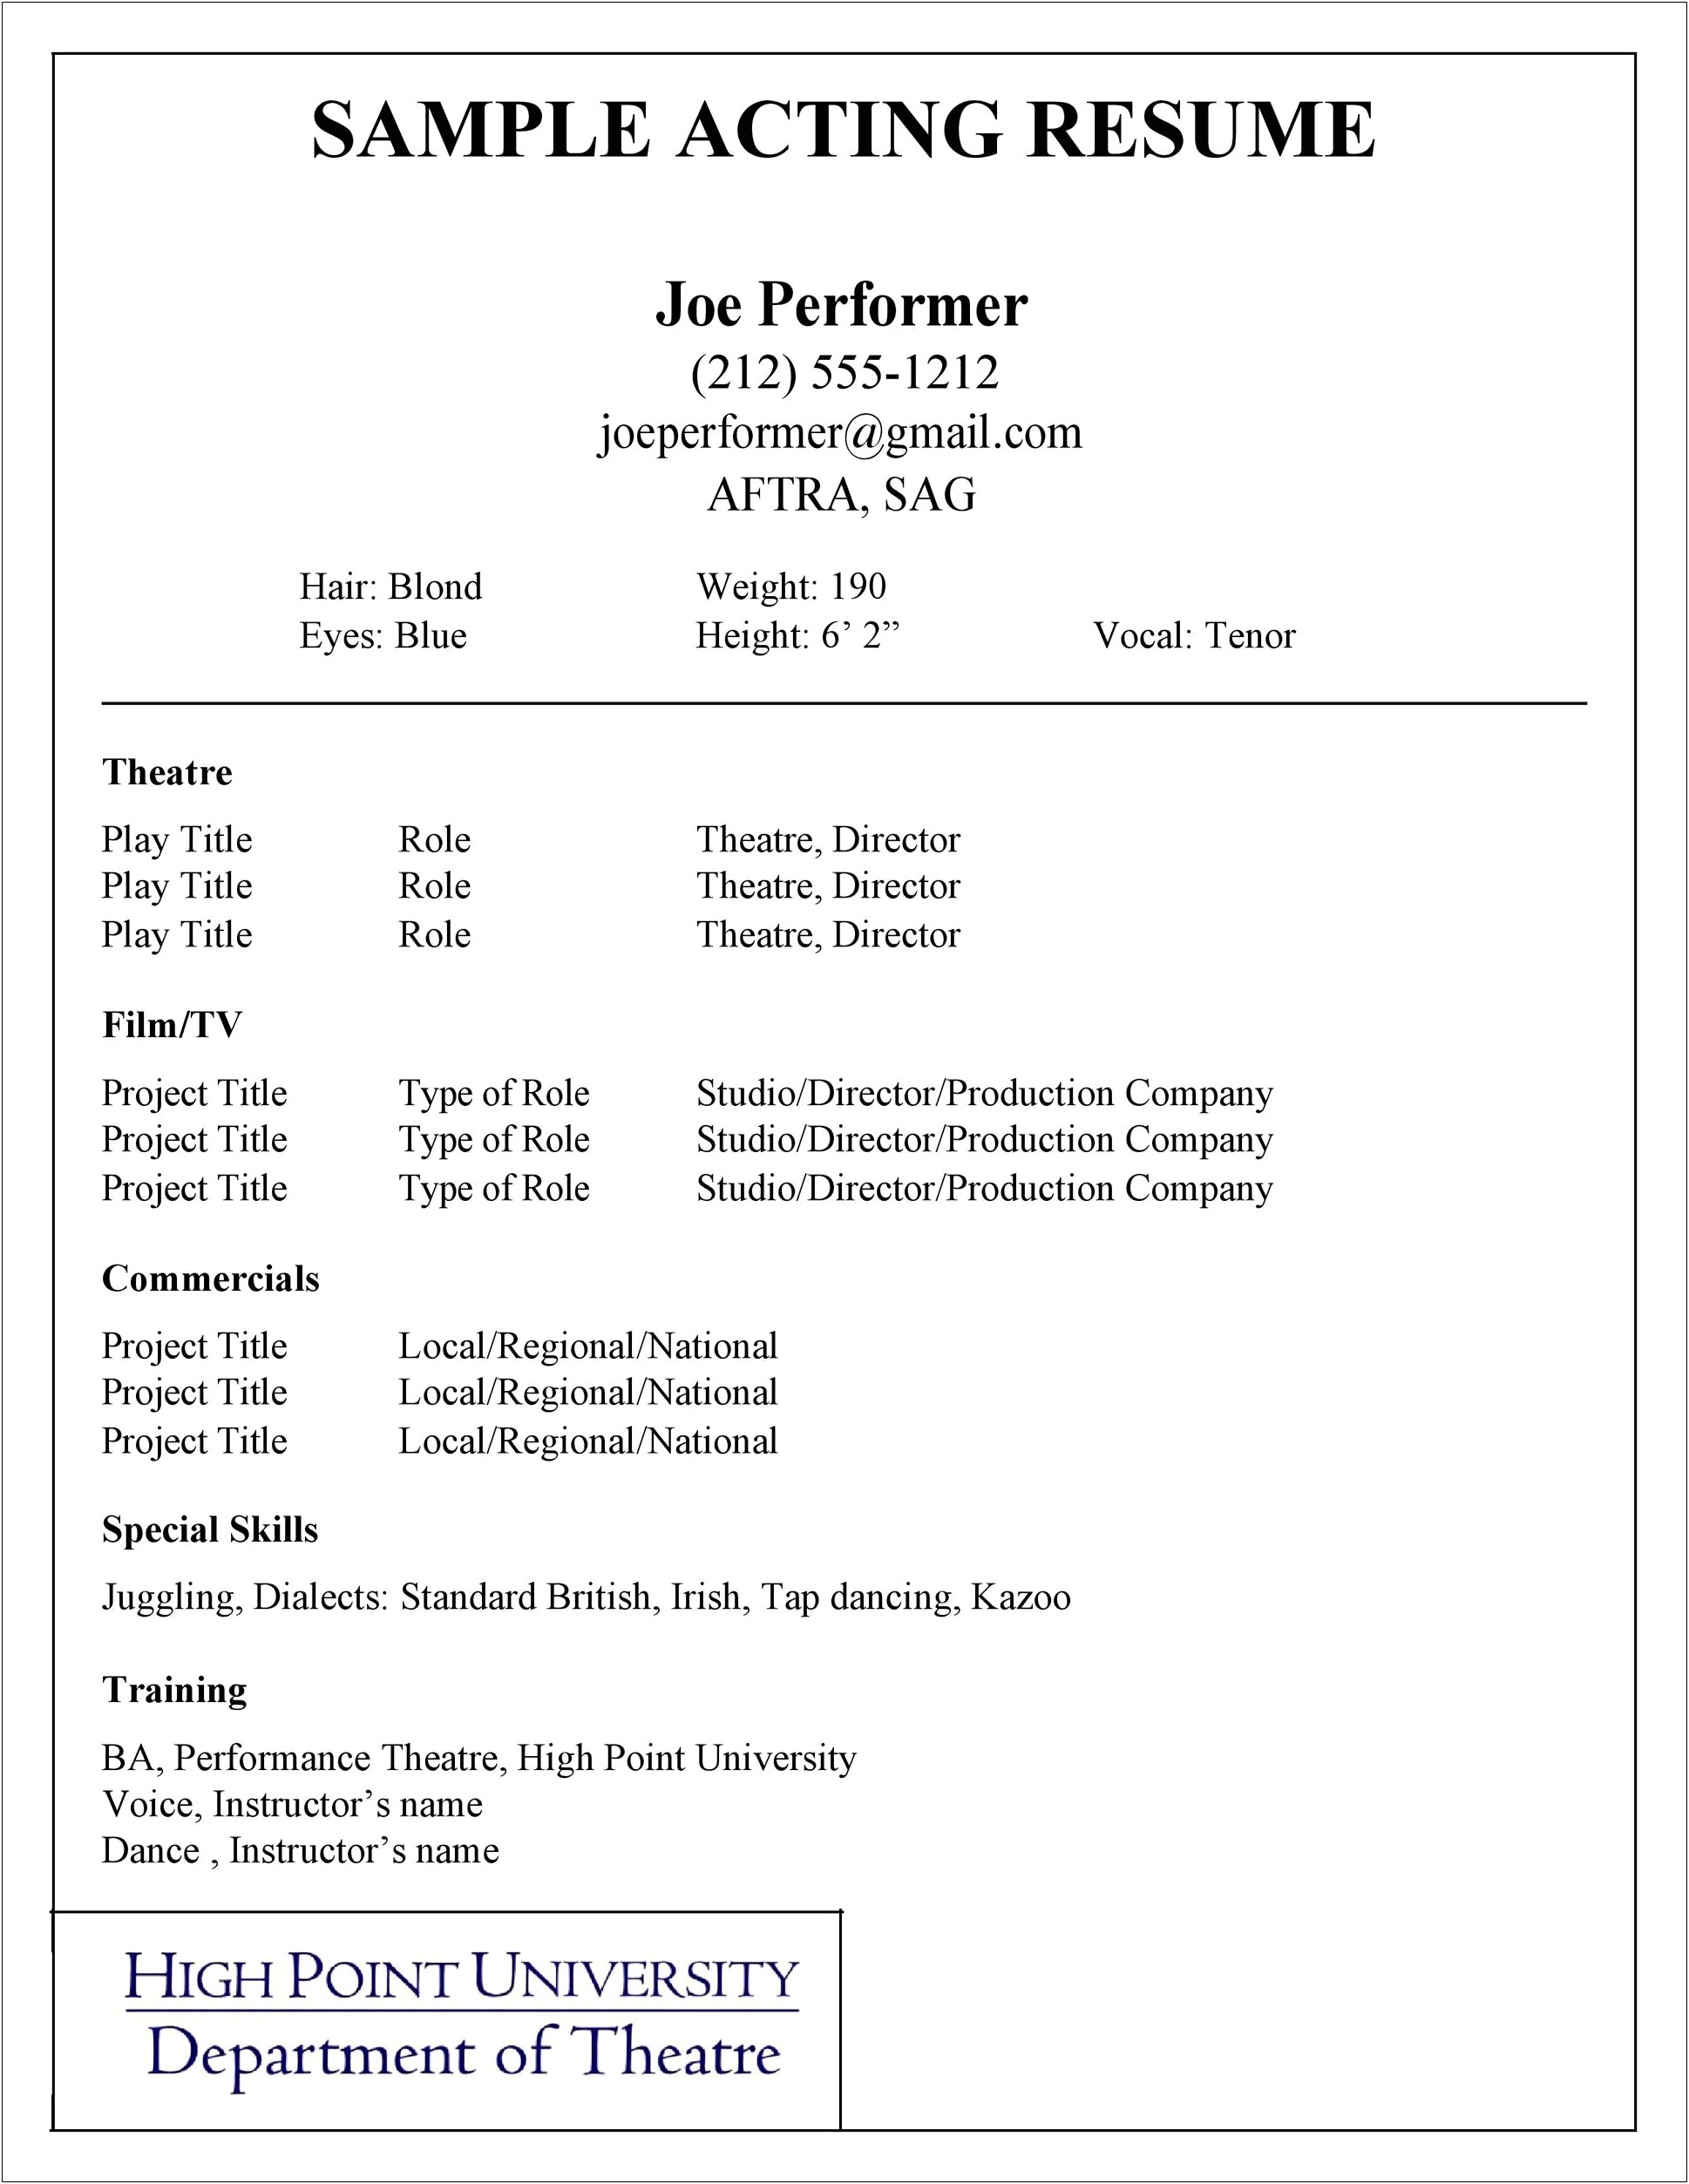 Example Of A Filled Out Google Doc Resume